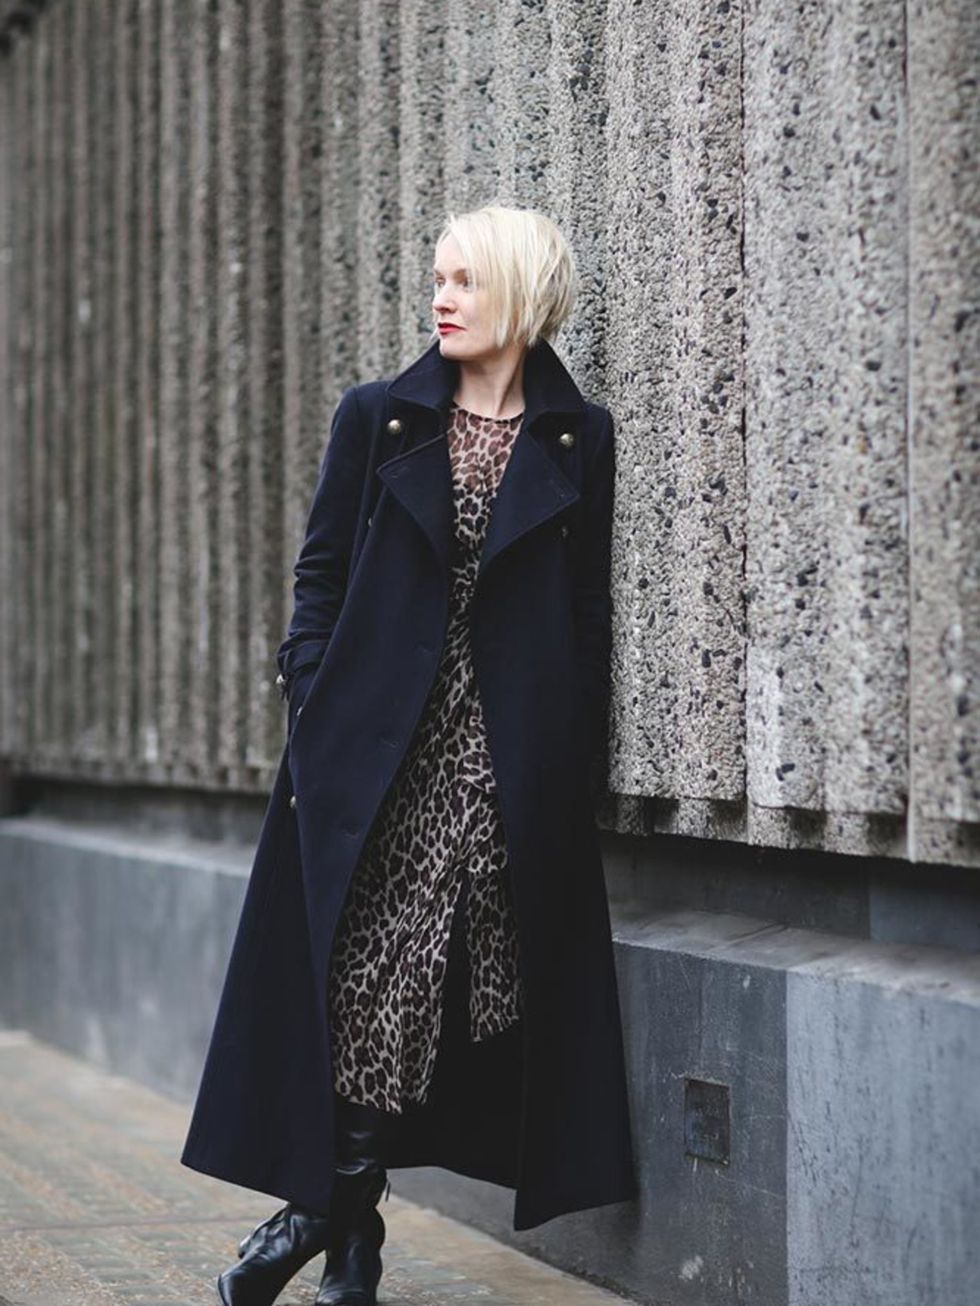 <p>Lorraine Candy, Editor-in-Chief</p>

<p>Marks and Spencer coat, Topshop dress, Prada boots</p>